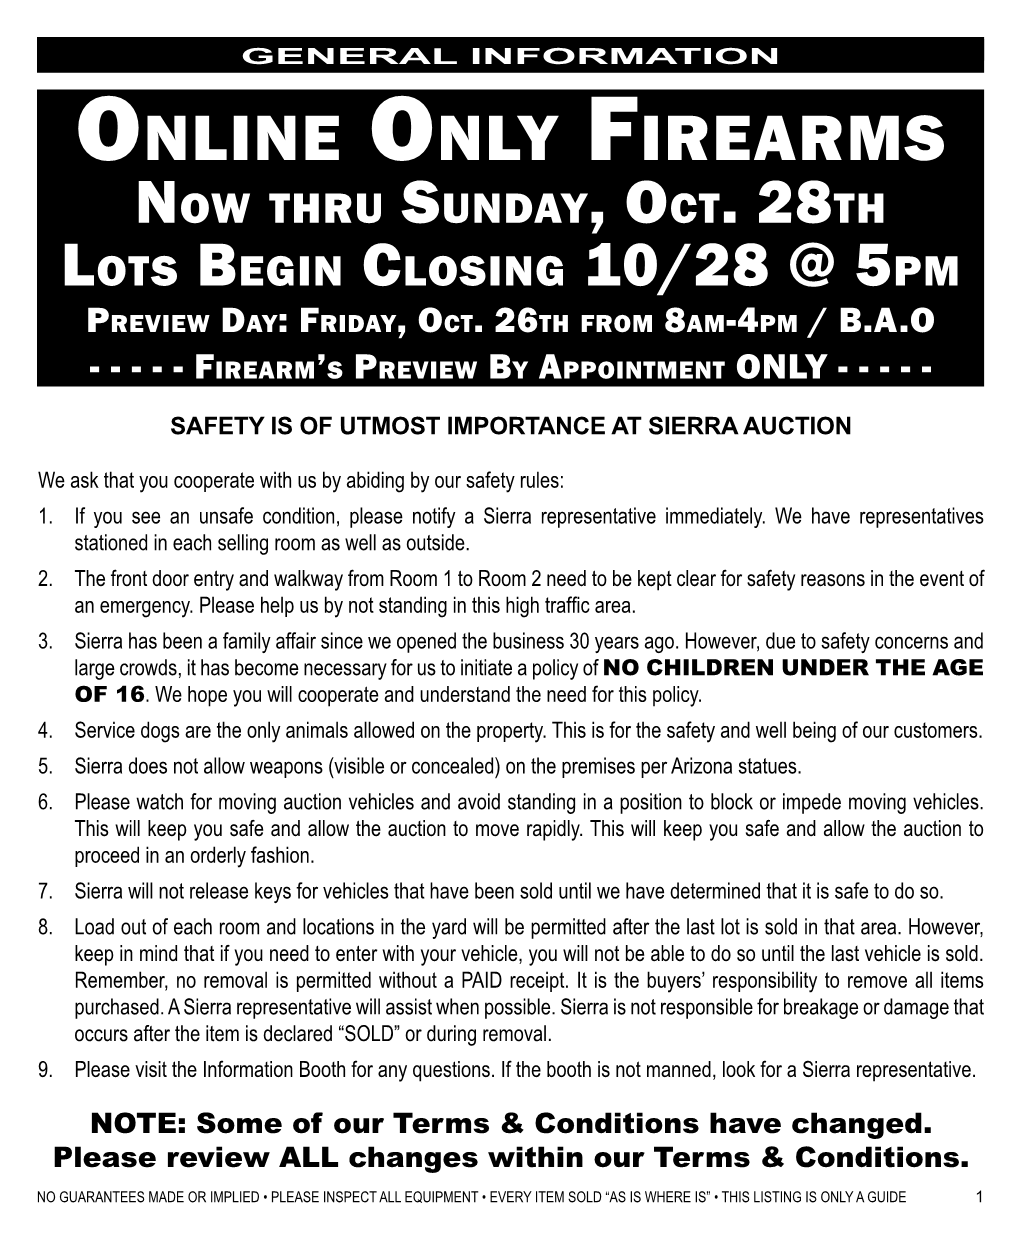 Online Only Firearms Now Thru Sunday, Oct